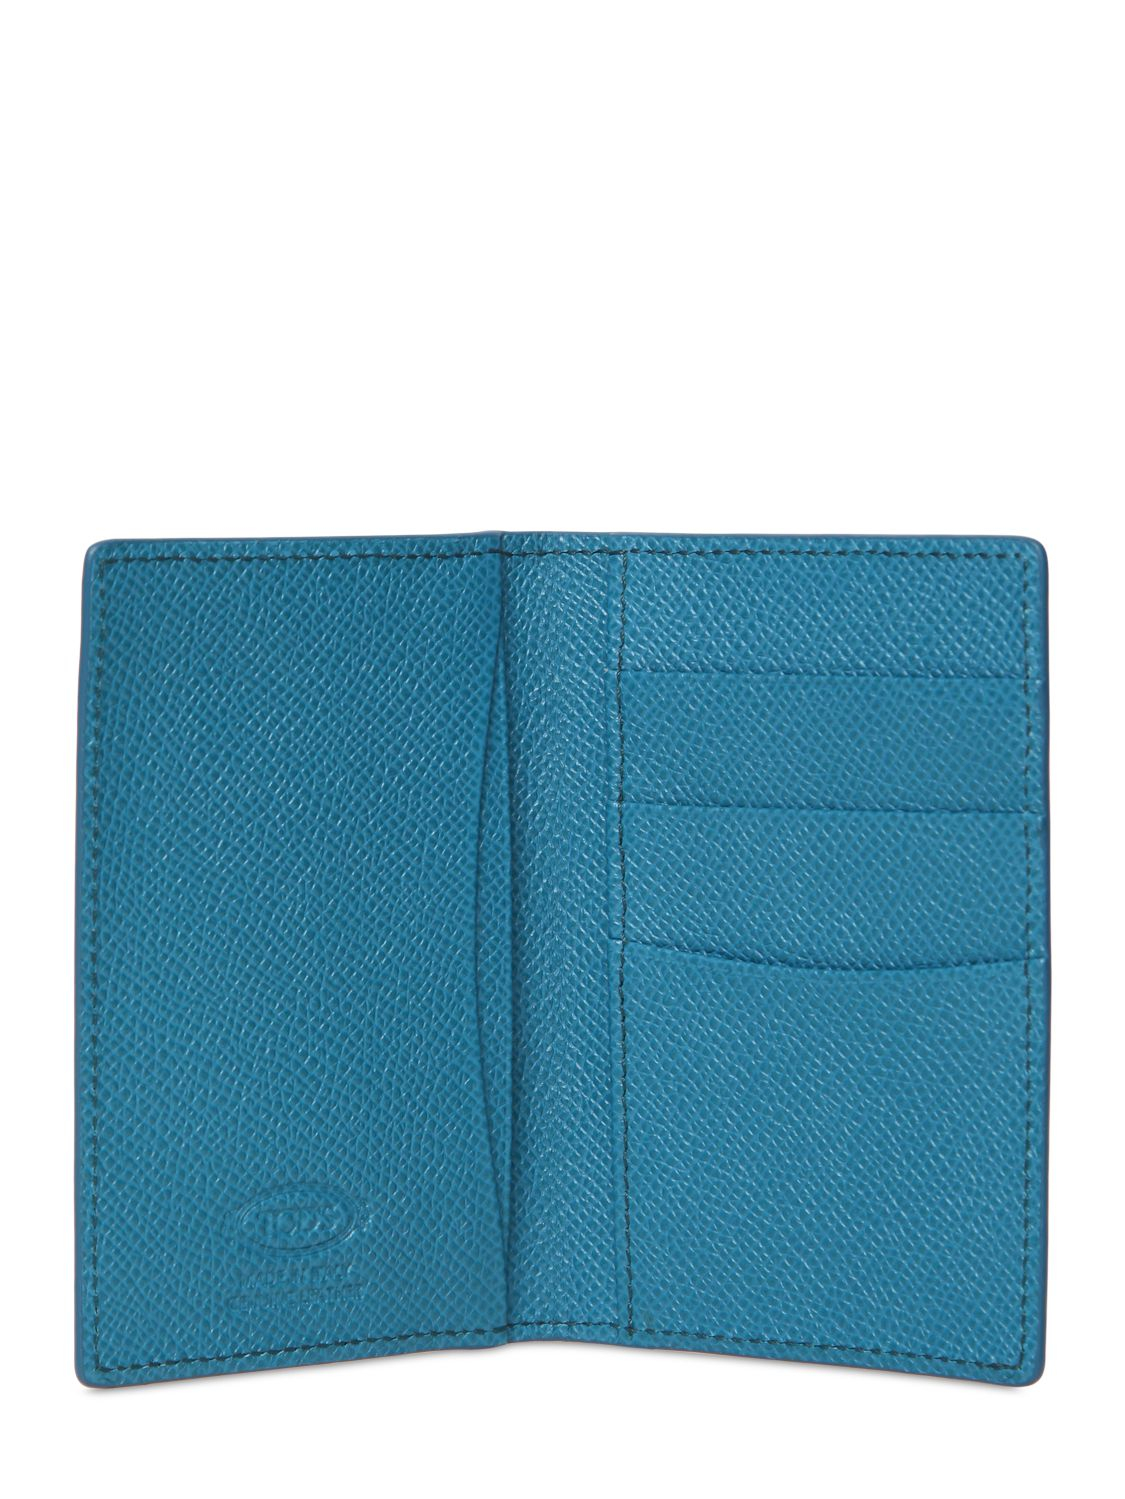 Name:  tods-blue-vertical-grained-leather-card-holder-product-1-16410734-2-403725095-normal.jpeg
Views: 743
Size:  631.9 KB